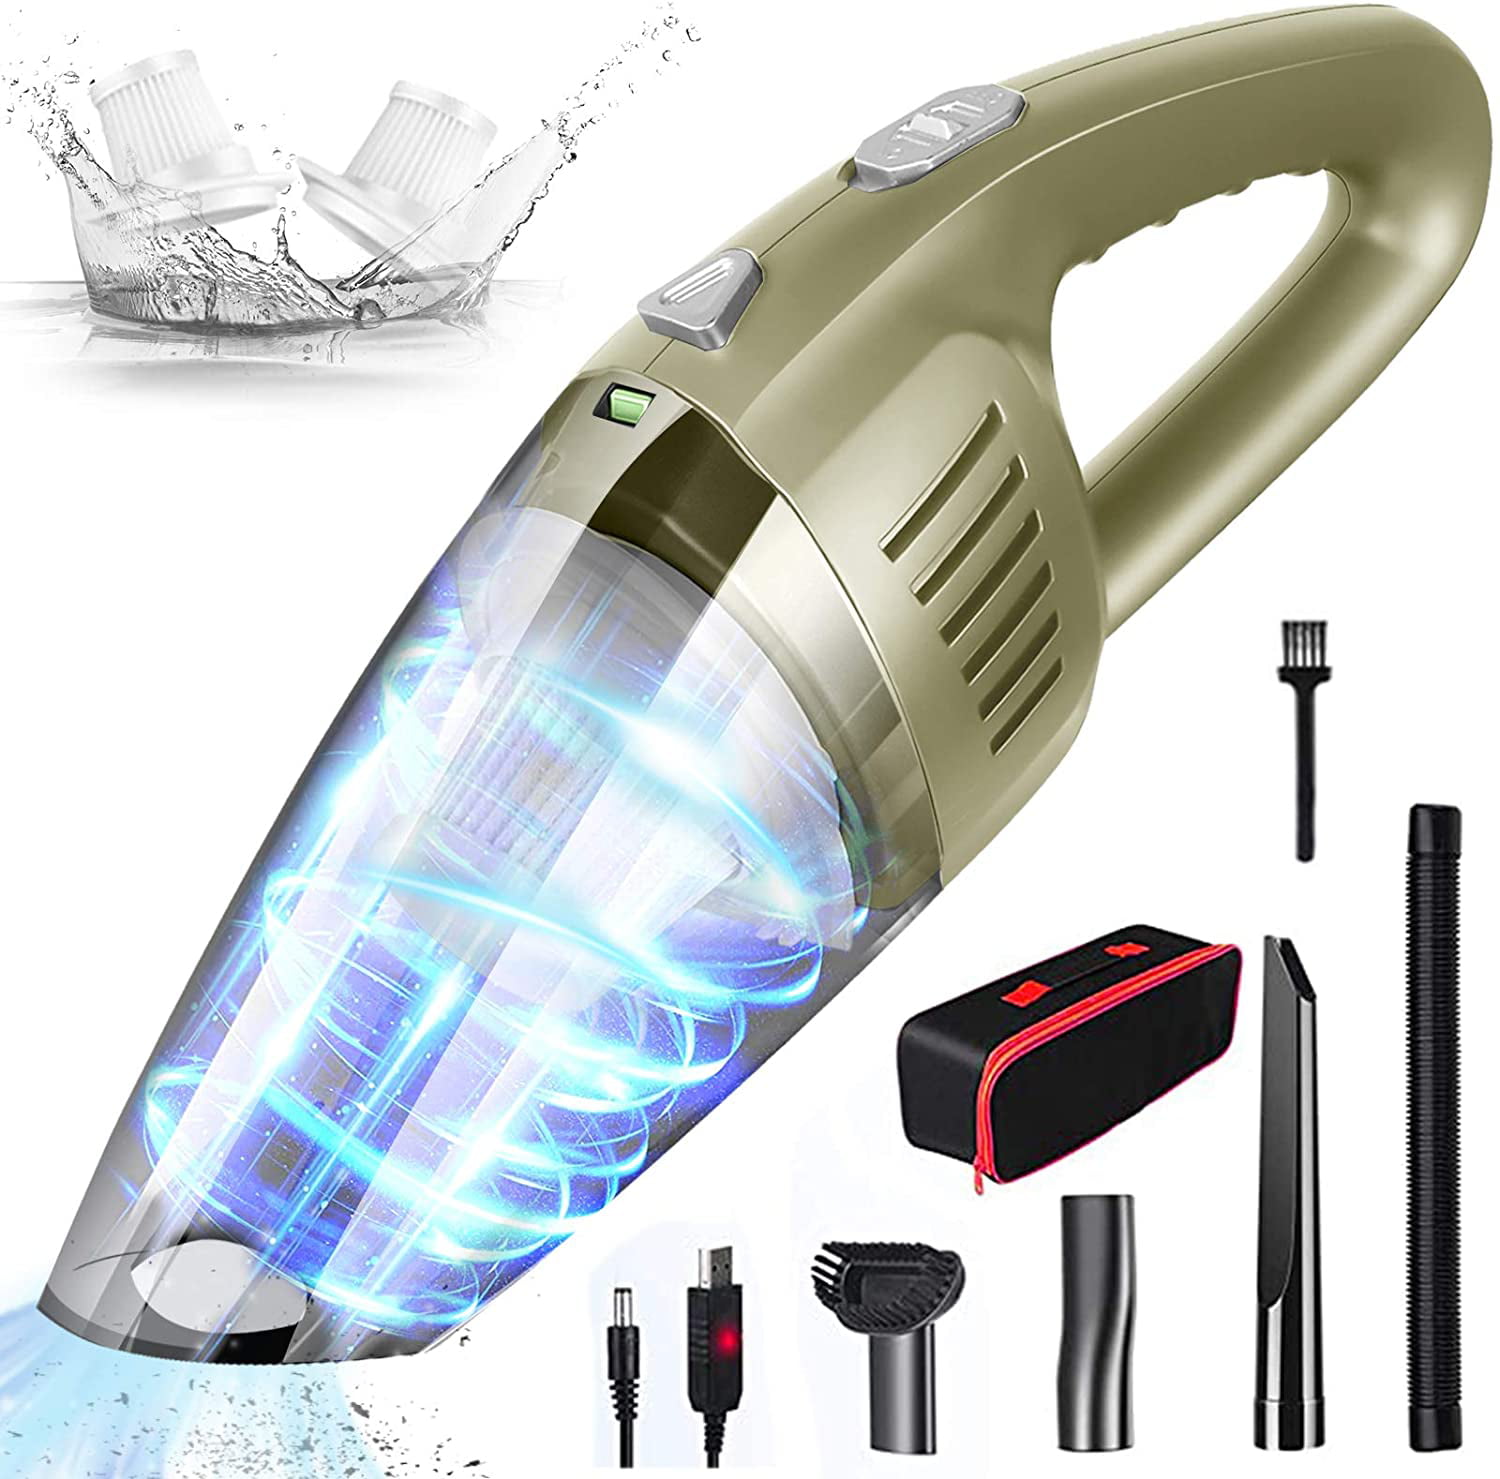 Portable Vacuum Hand Held Vacuum Cleaner 2200mAh Battery Hand Vacuum Cleaner with Lightweight Mini Dry/Wet Car Vacuum with LED Light High Power 8000PA Whall Handheld Vacuum Cordless